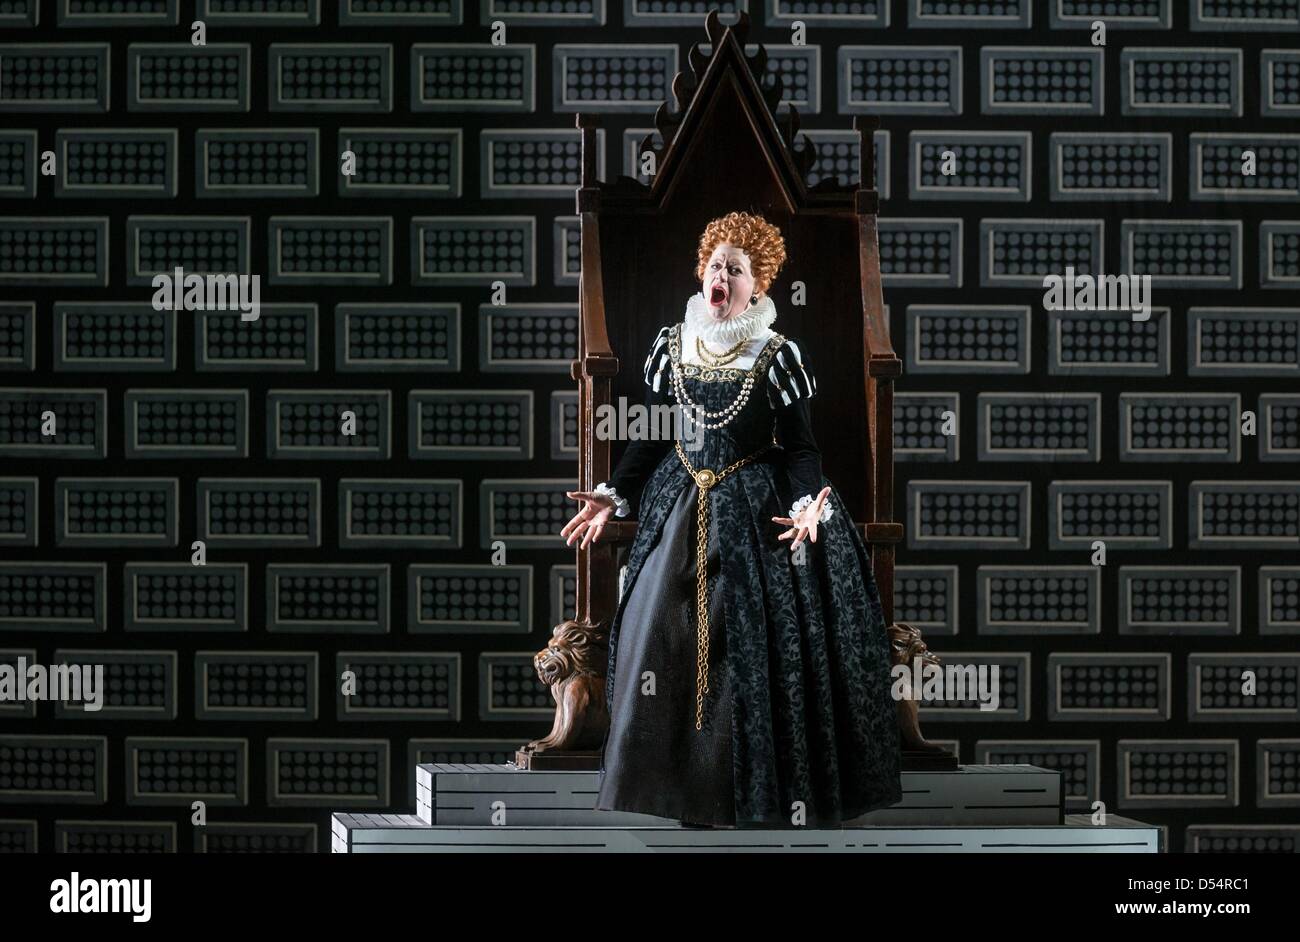 British soprano Amanda Roocroft as 'Queen Elizabeth I' performs during a press rehearsal of Benjamin Britten's 'Gloriana' in Hamburg, Germany, 21 March 2013. The opera production directed by Richard Jones and under the musical direction of Simone Young premieres at the Hamburg State Opera on 24 March 2013. Photo: Markus Scholz Stock Photo